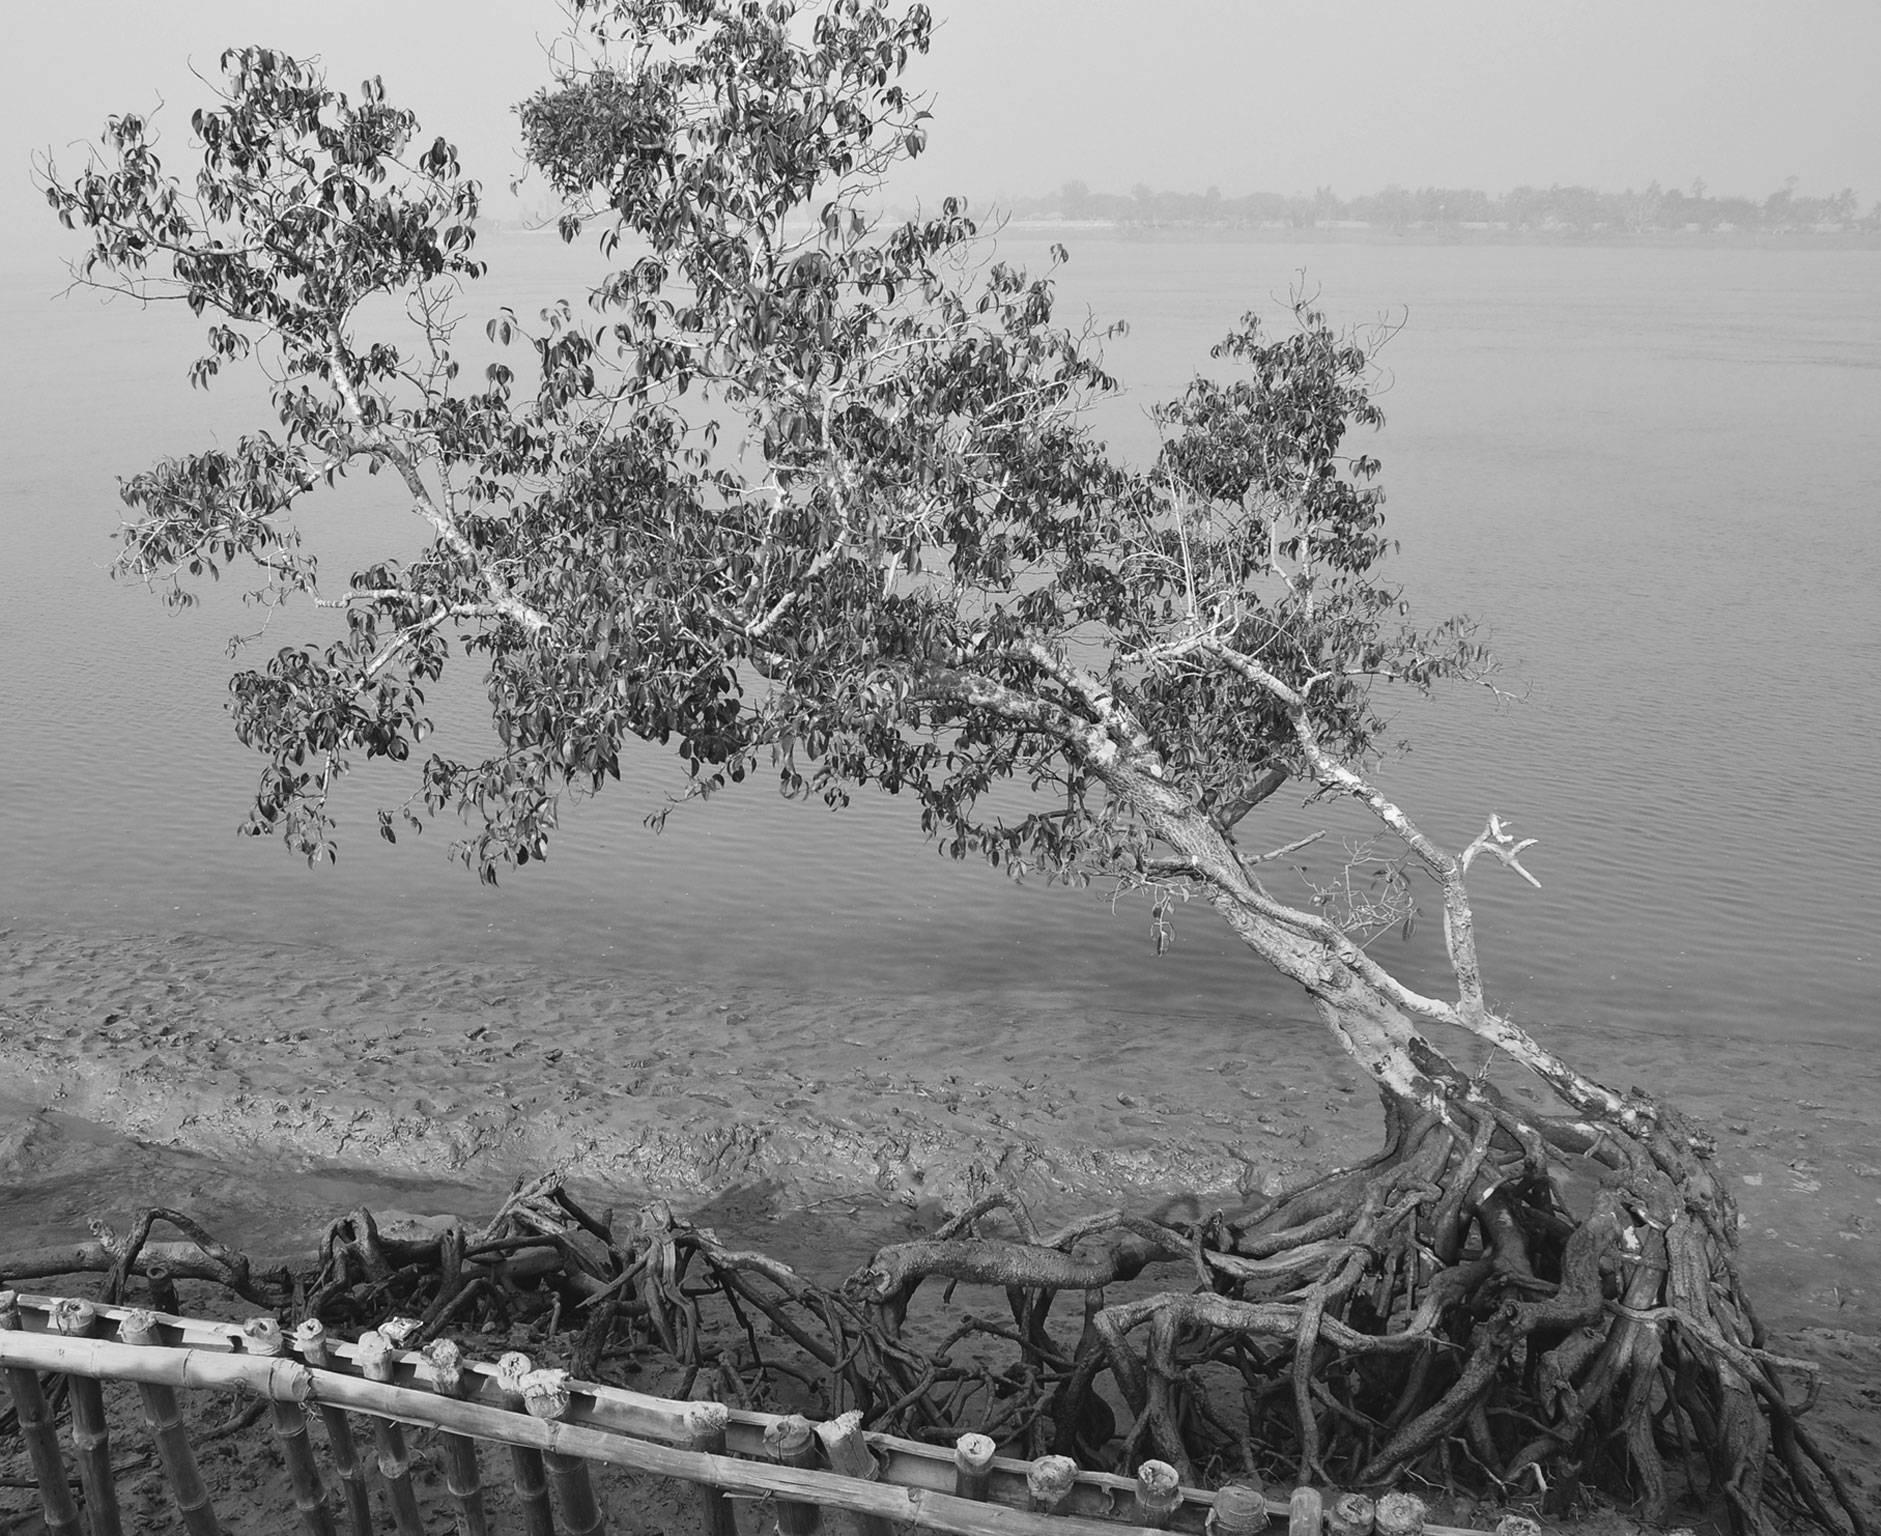 Rural Scenery, Boat, River, Black & White Photography by Indian Artist